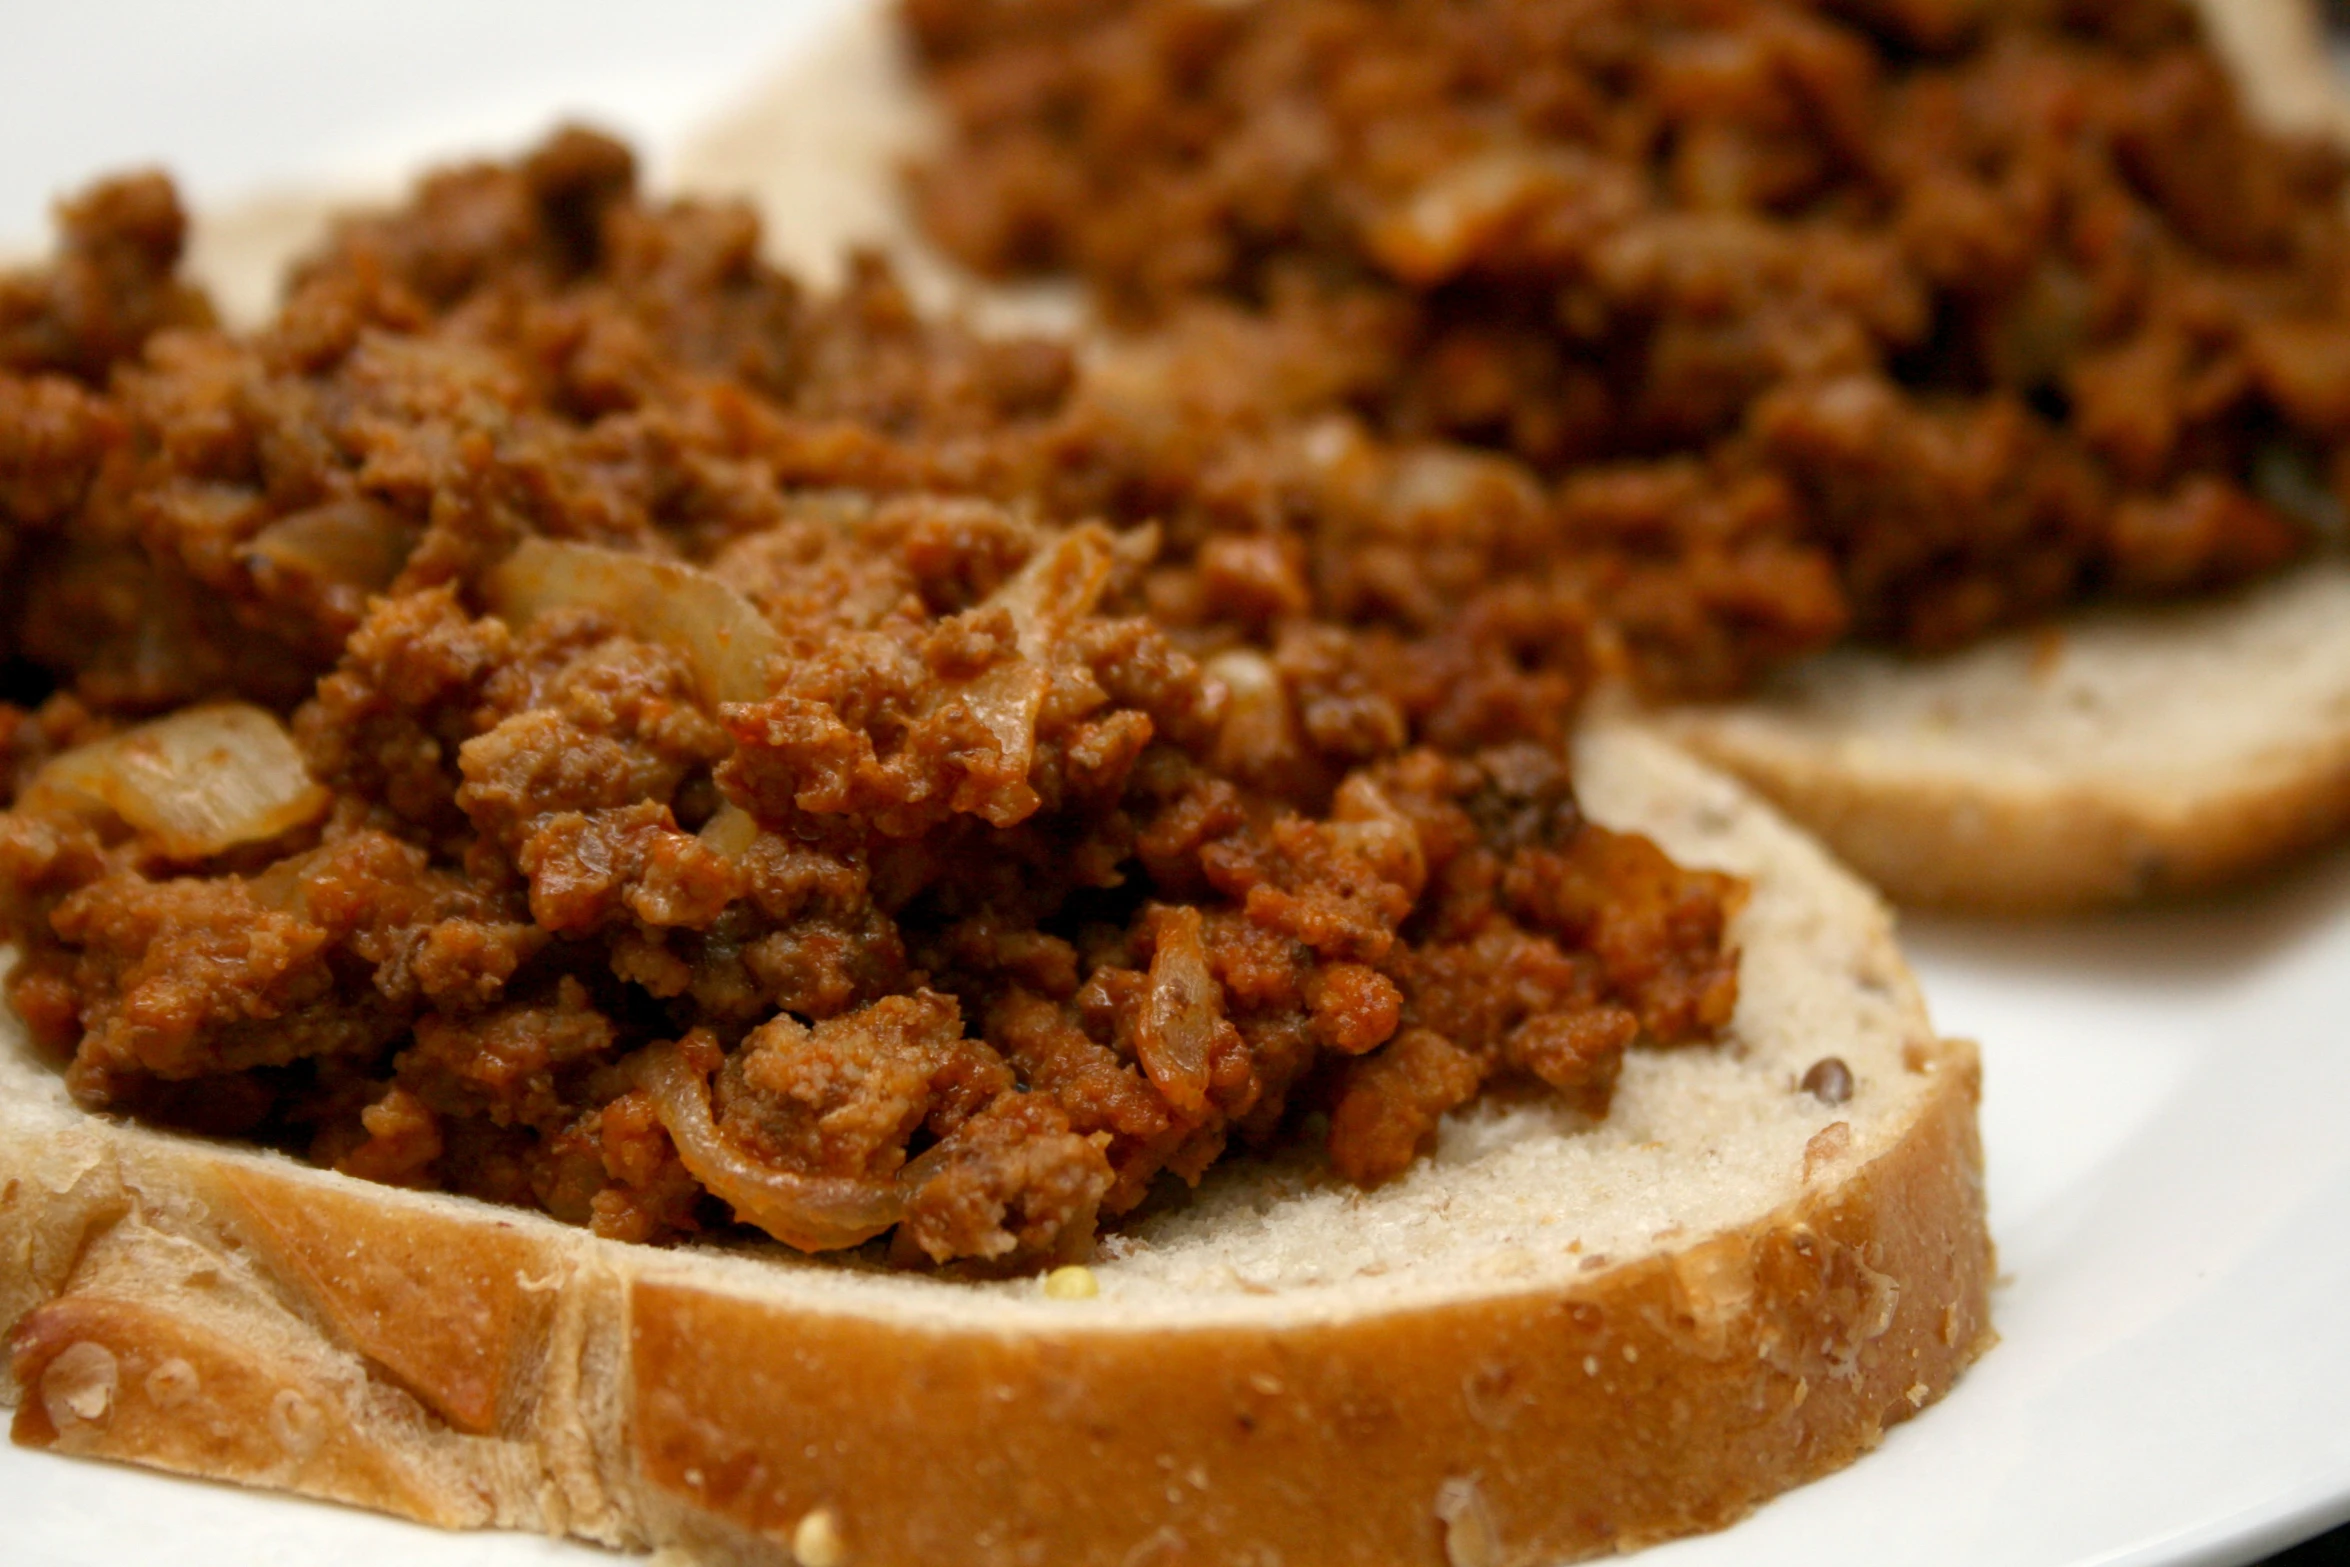 sloppy joes are sitting on the side of a white plate